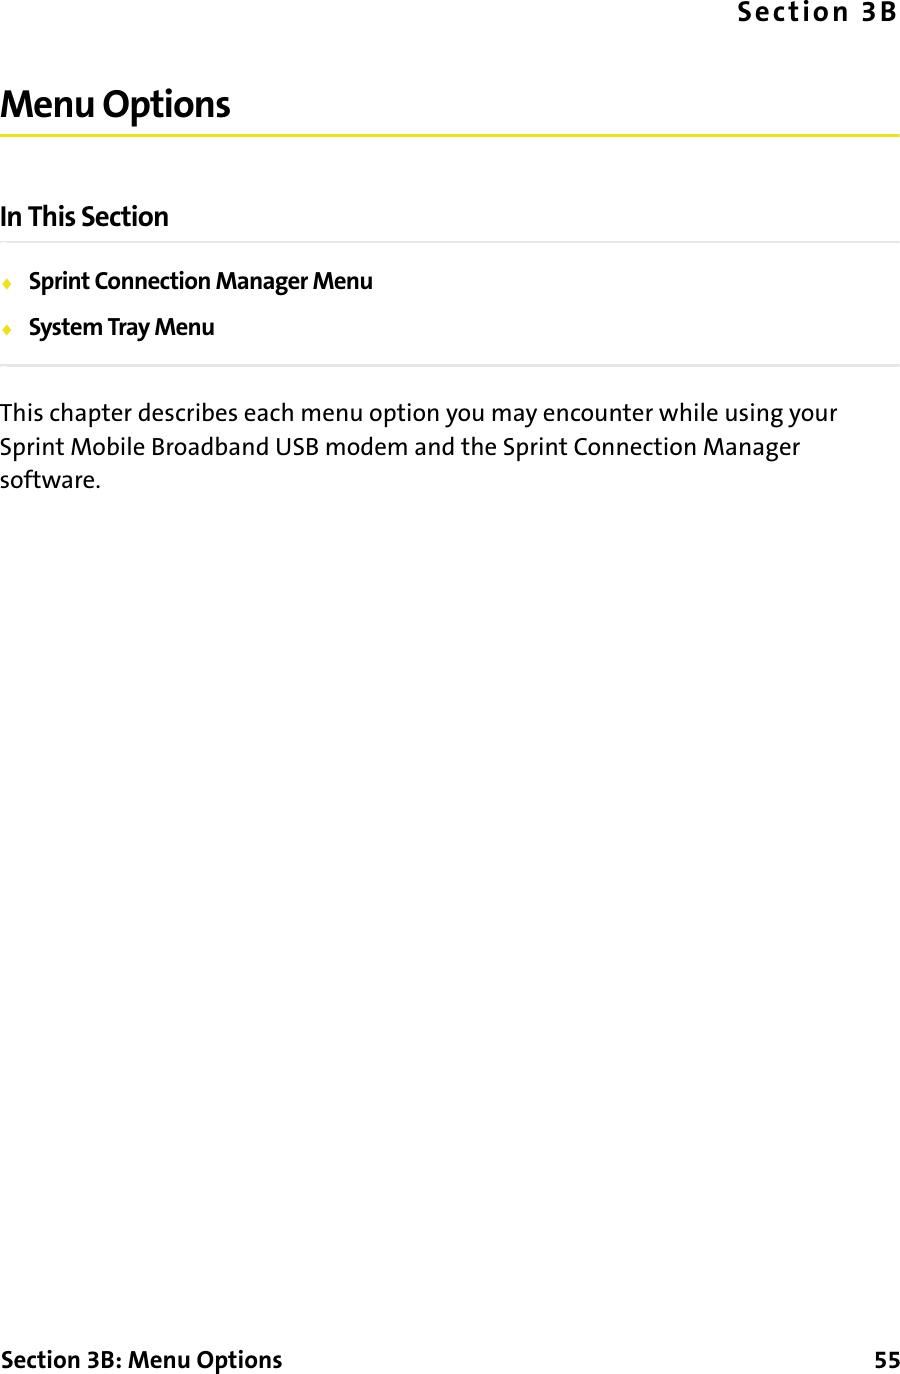 Section 3B: Menu Options      55Section 3BMenu OptionsIn This Section⽧Sprint Connection Manager Menu⽧System Tray MenuThis chapter describes each menu option you may encounter while using your Sprint Mobile Broadband USB modem and the Sprint Connection Manager software.